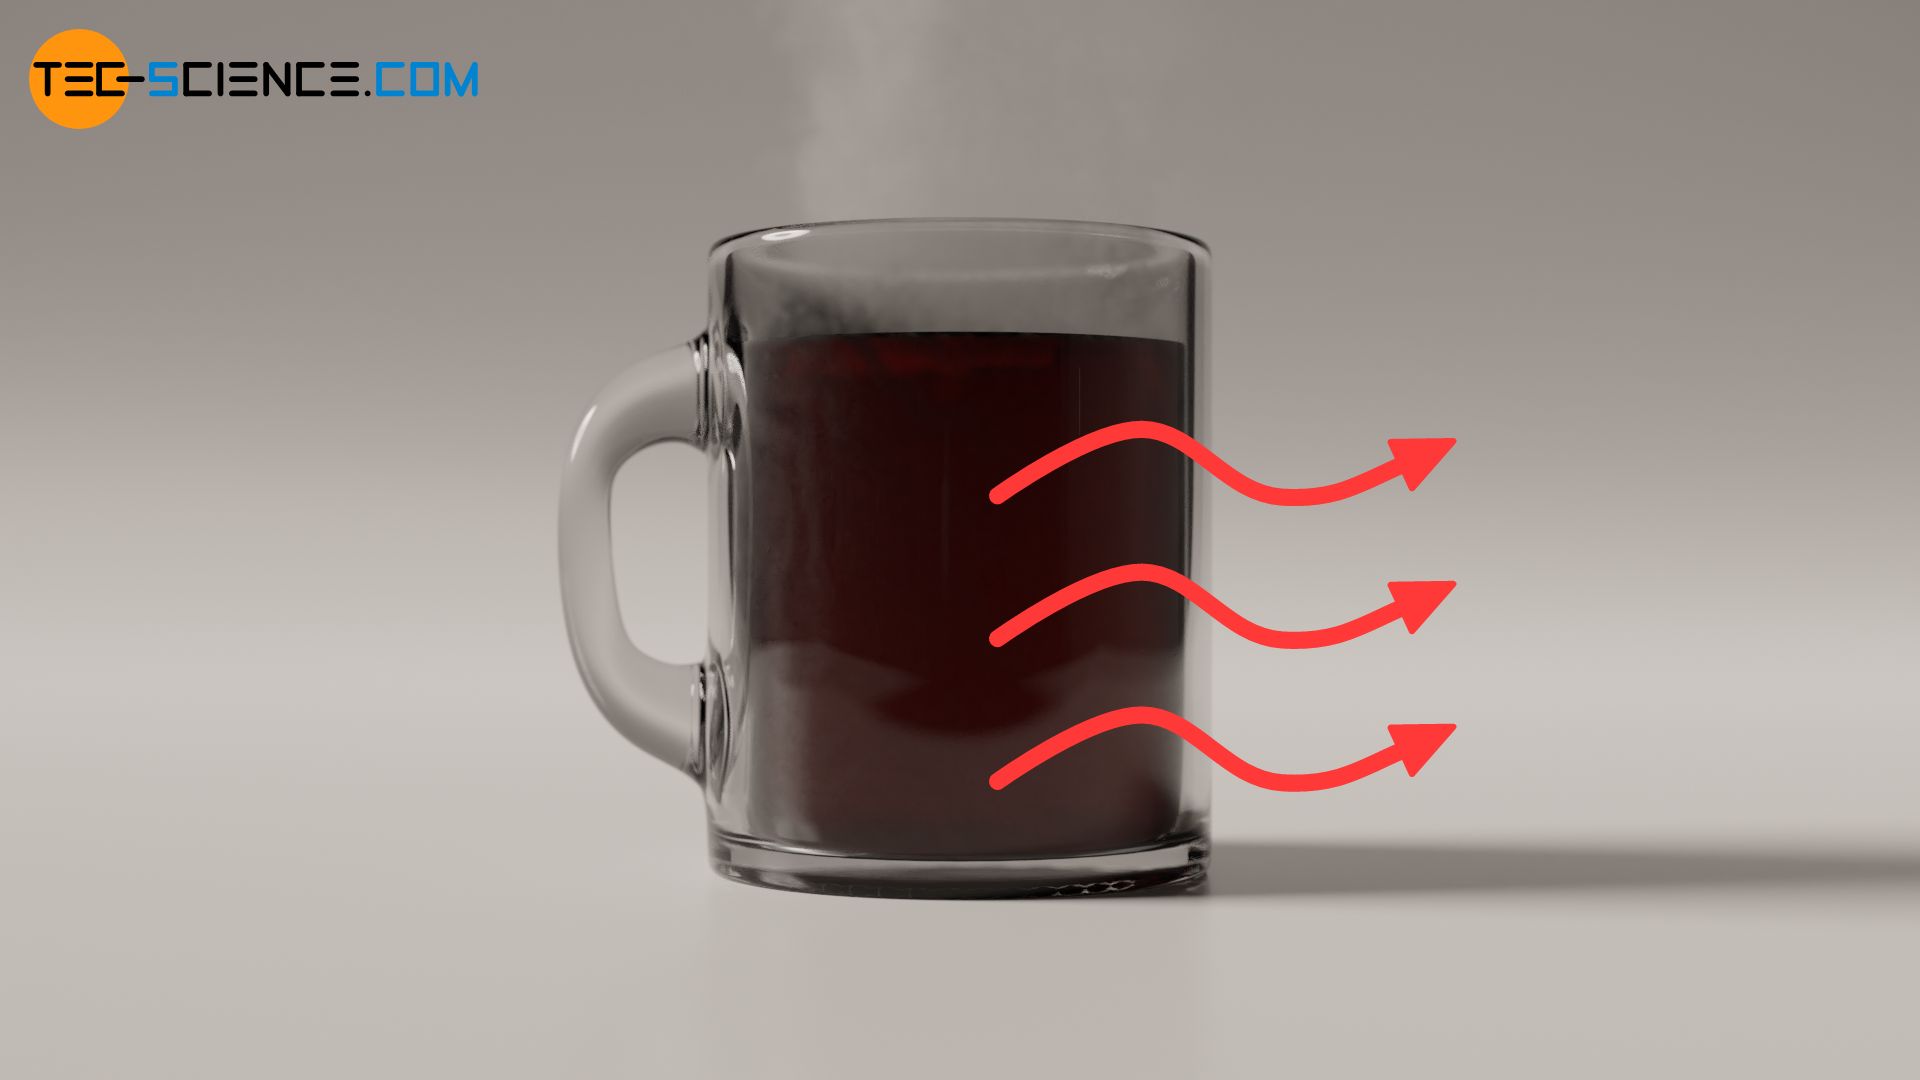 Direction of heat flow from hot coffee to the surroundings